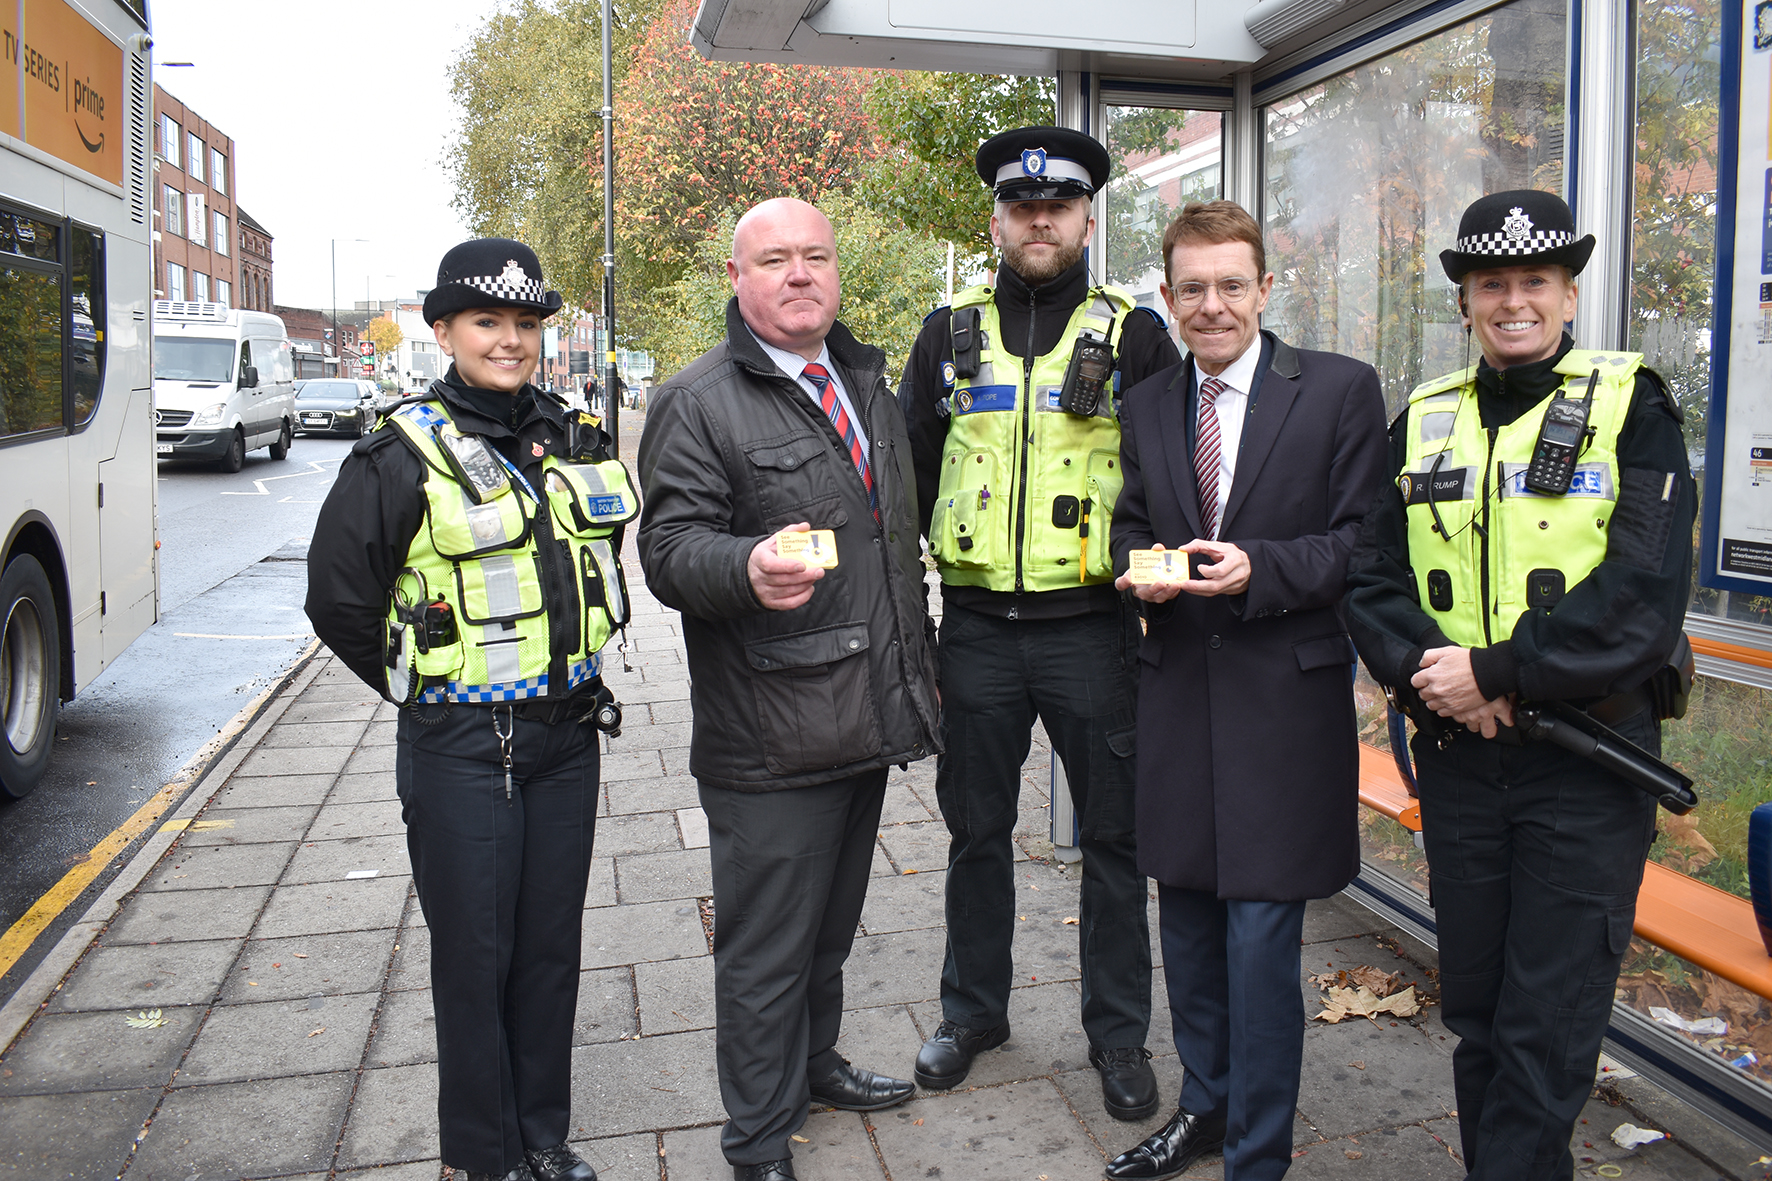 (l-r) Sgt. Nicola Mallaber of the Safer Travel Team, Tony Dallison, National Express’ head of security UK bus and coach, PCSO Andy Pope of the Safer Travel Team, Mayor of the West Midlands Andy Street  and Safer Travel Inspector Rachel Crump ahead of an operation to counter anti-social behaviour on buses